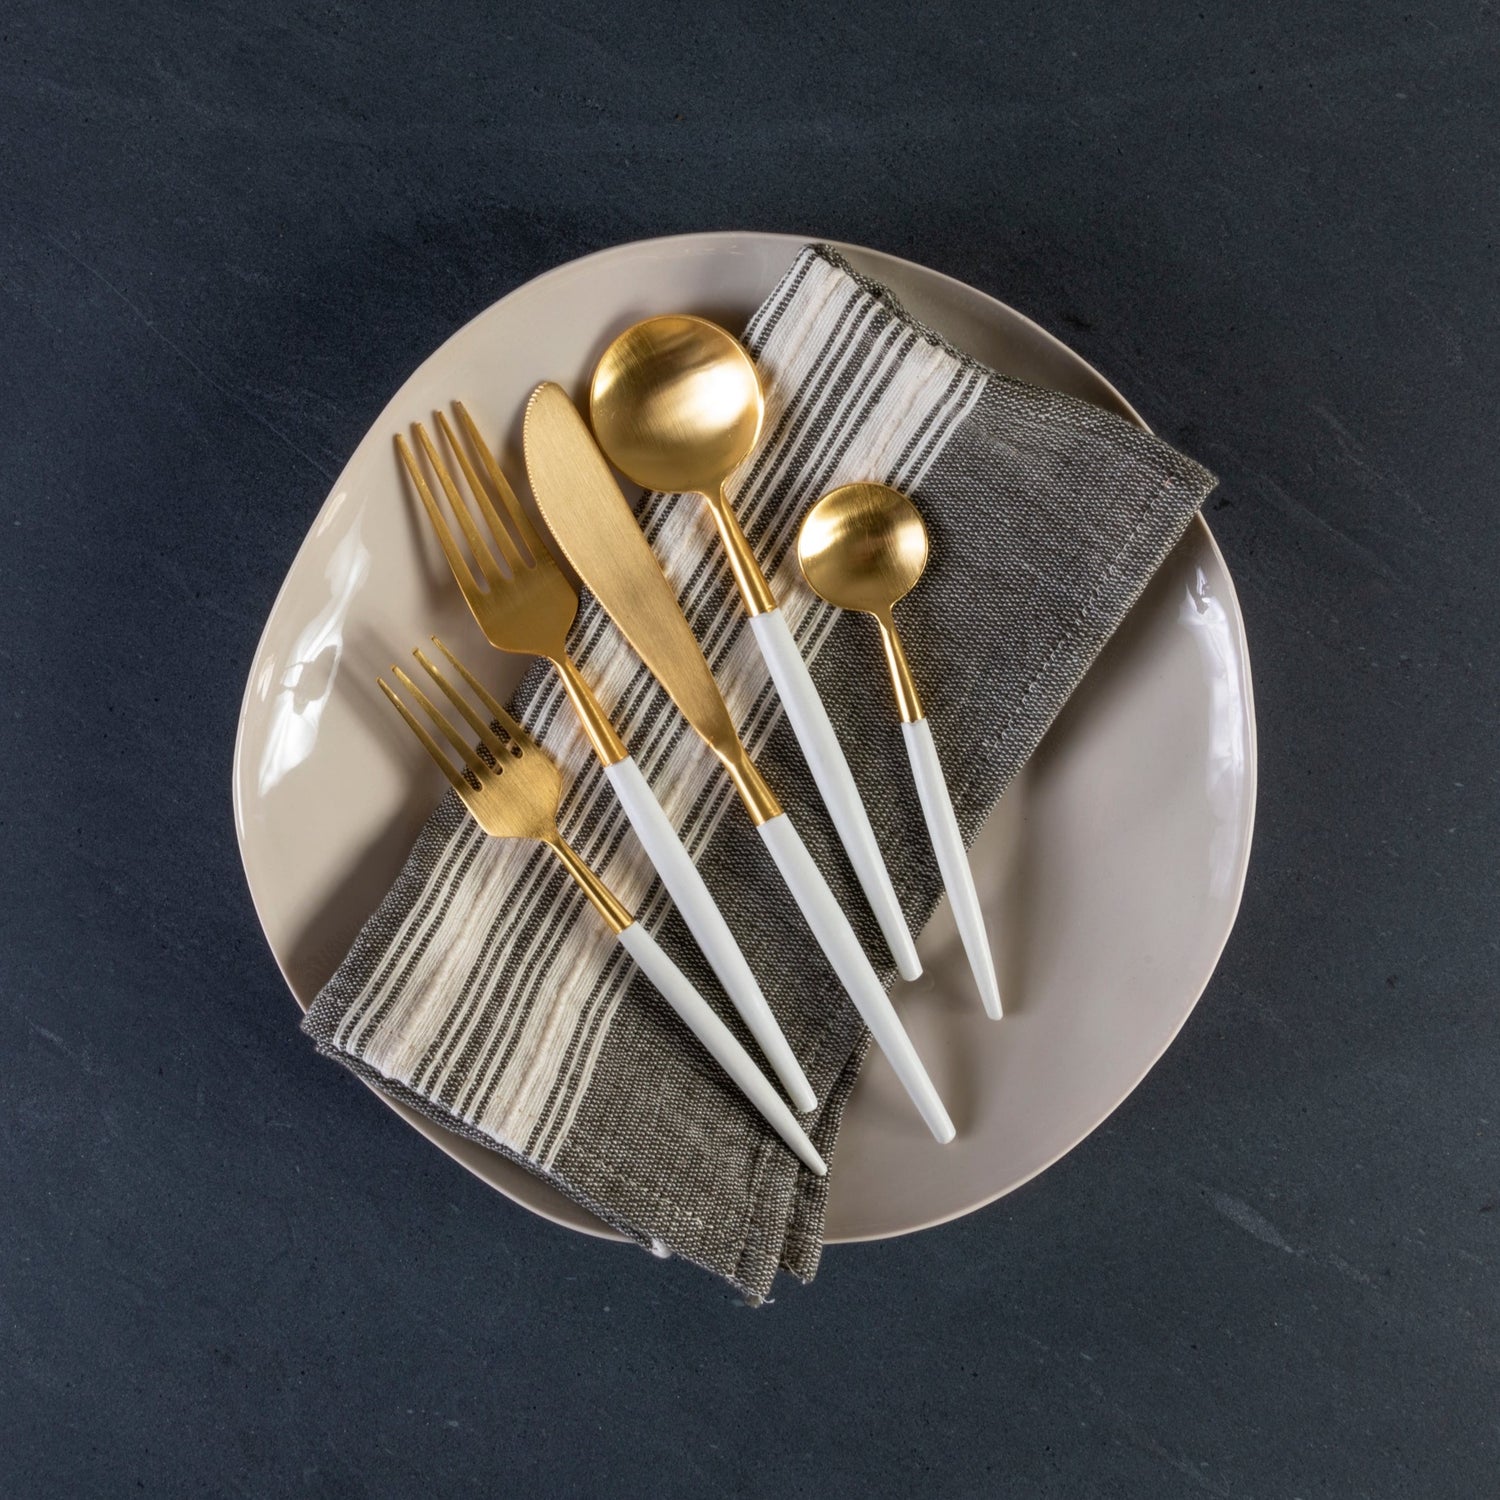 White & Gold Flatware Set – Be Home